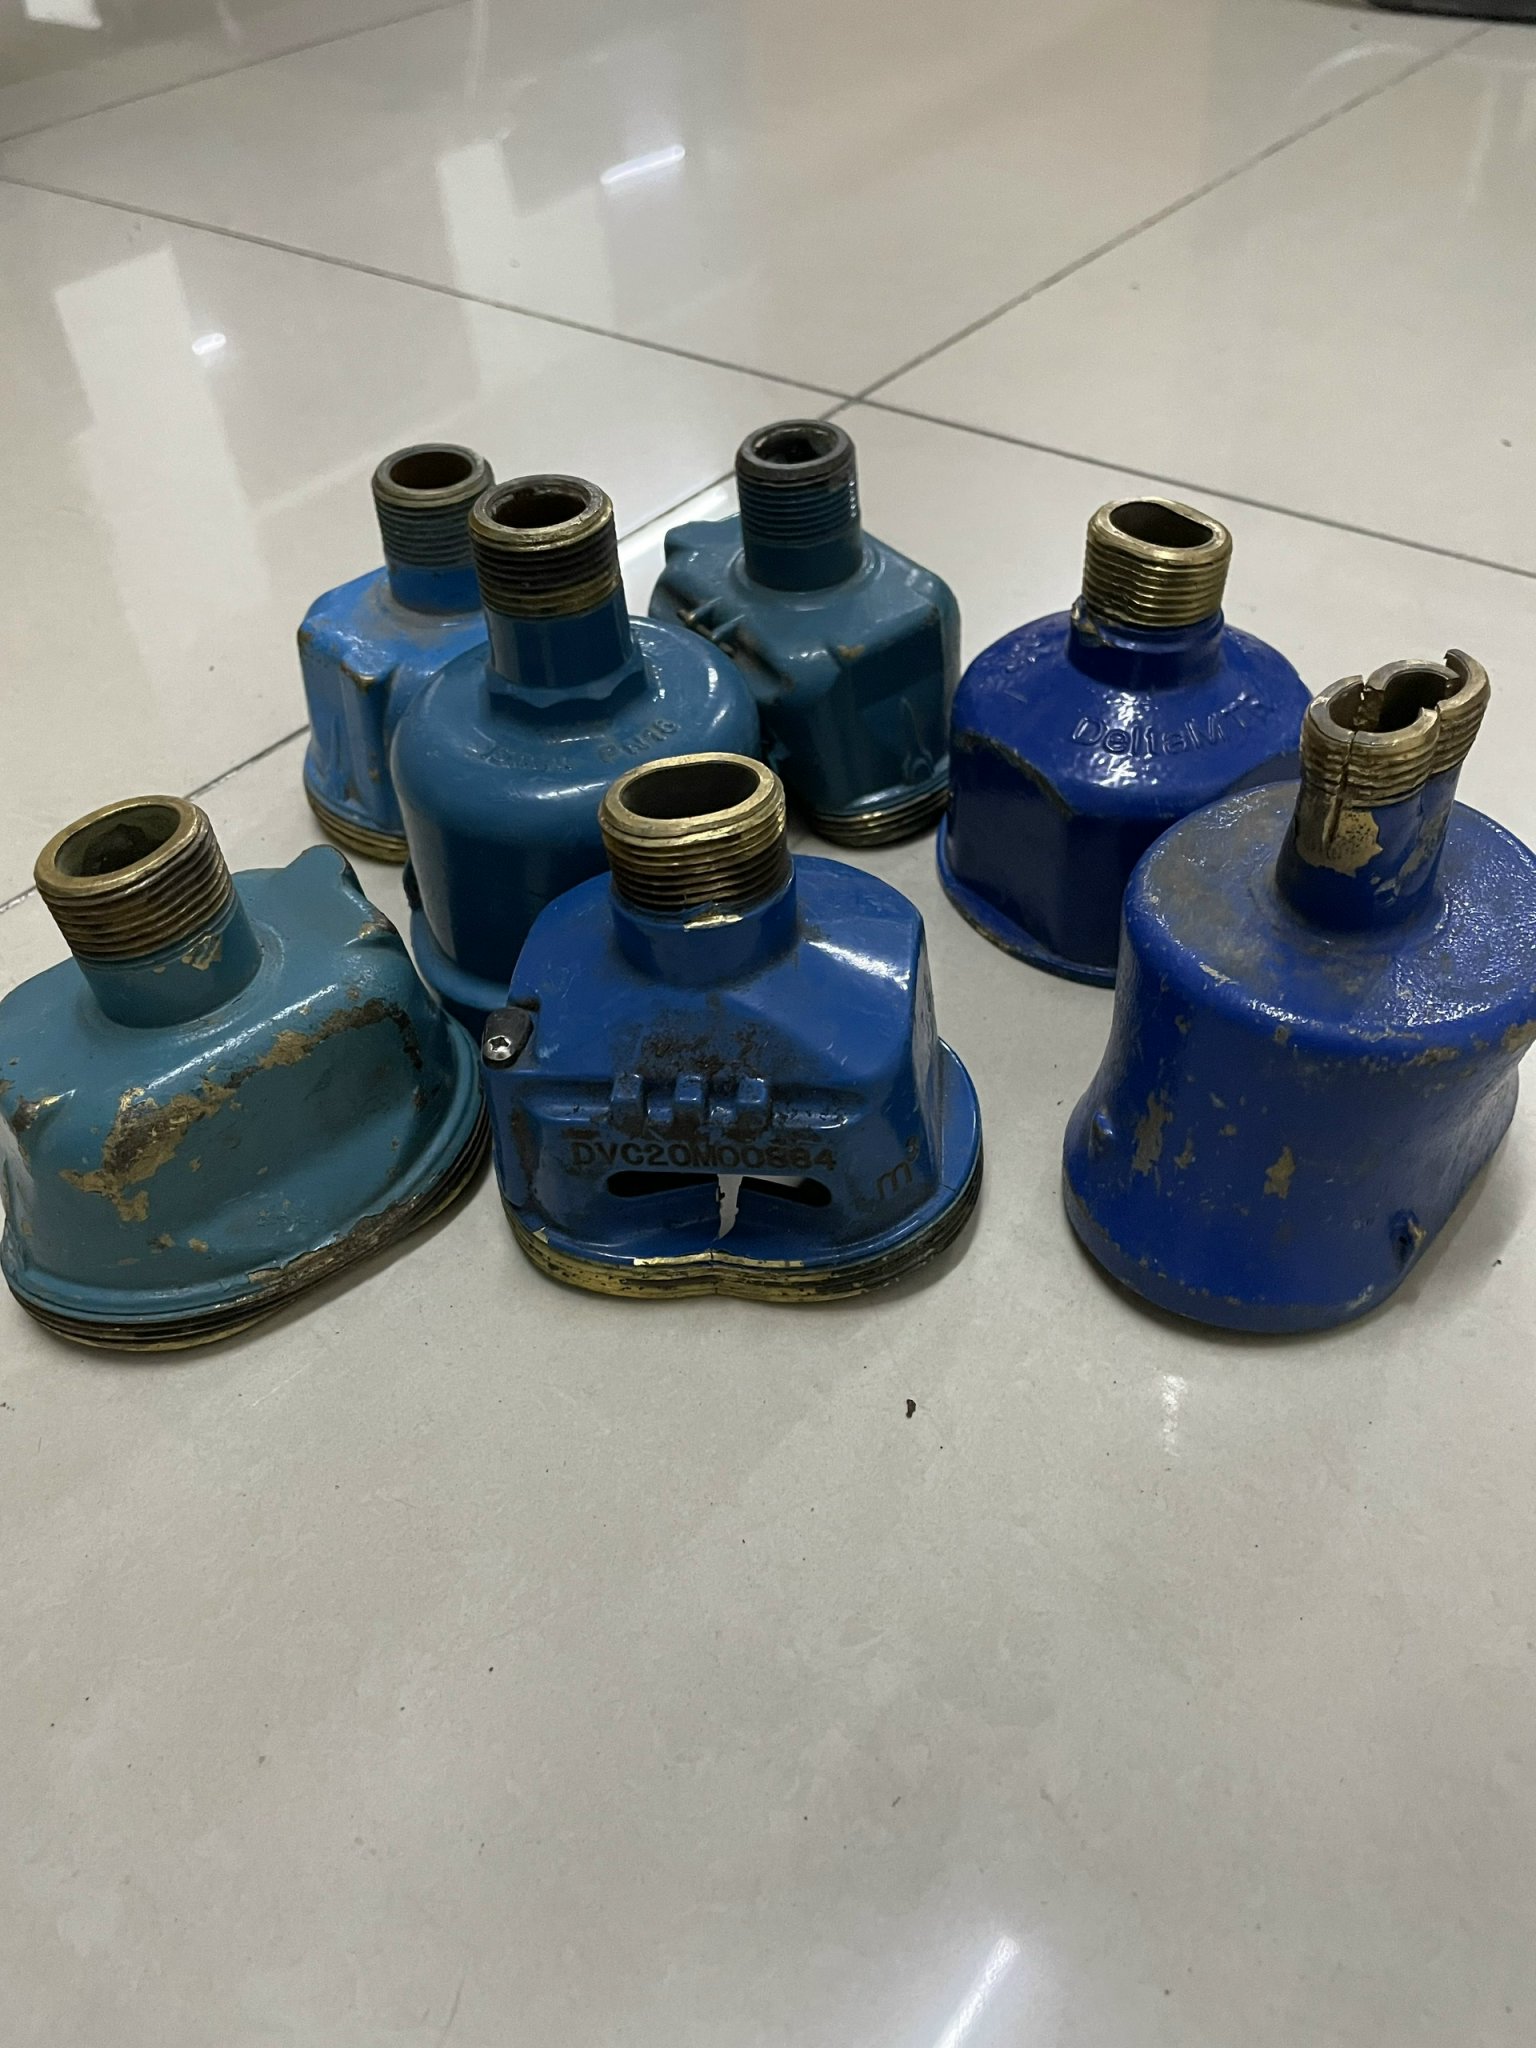 This supplied photo shows the residential water meters stolen by Tran Quoc Dai.